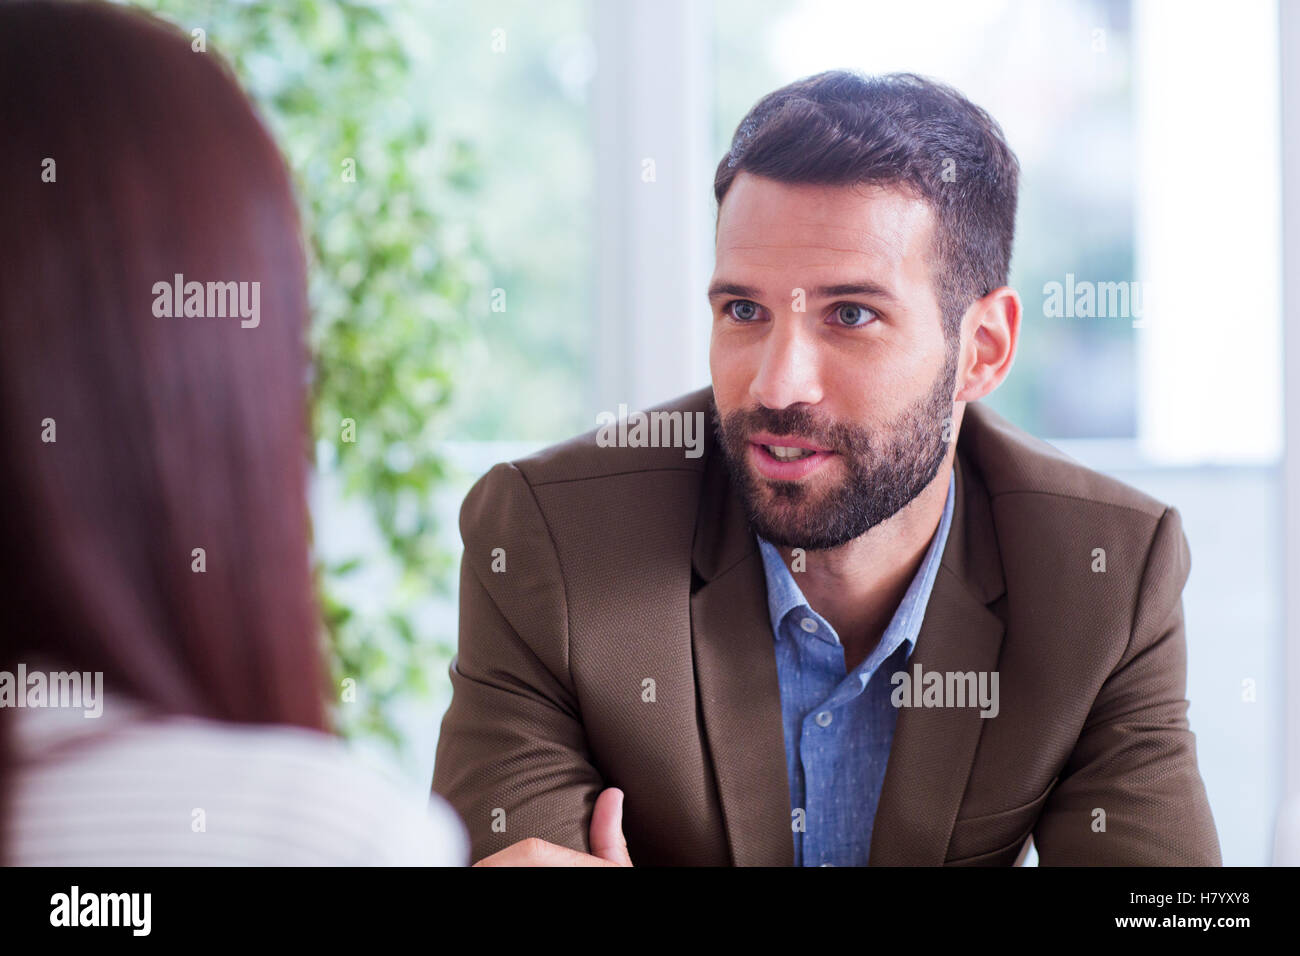 Man and Woman working in office Stock Photo